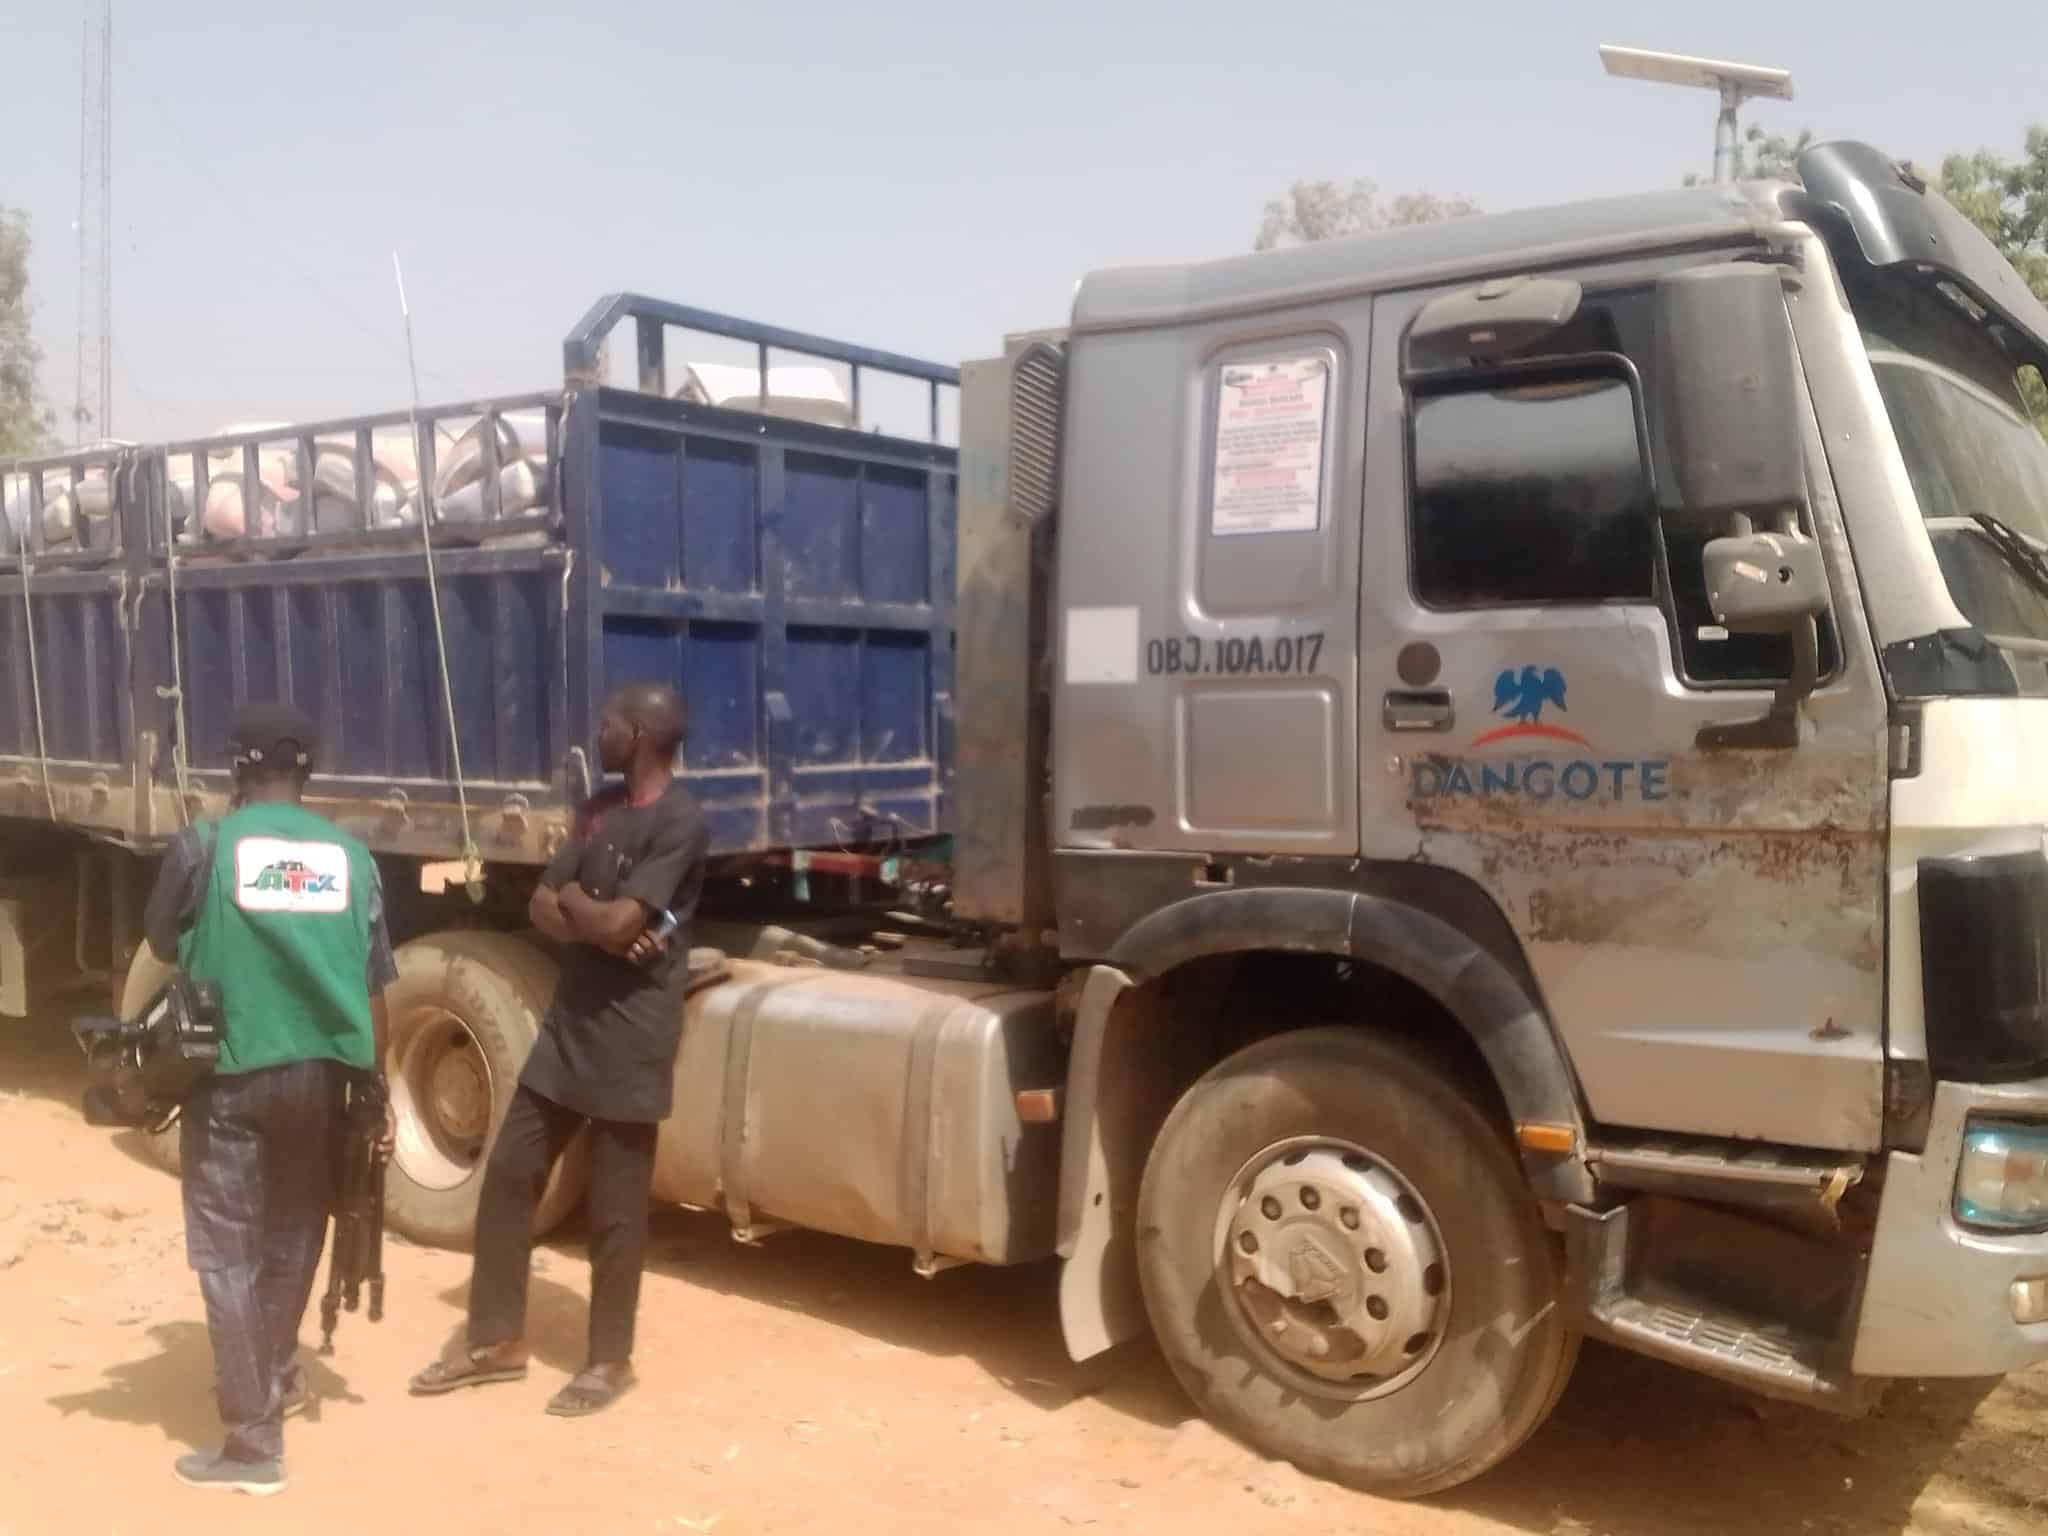 BREAKING: Army Intercepts Dangote Trucks Allegedly Transporting 'Prohibited Goods' To Cameroon